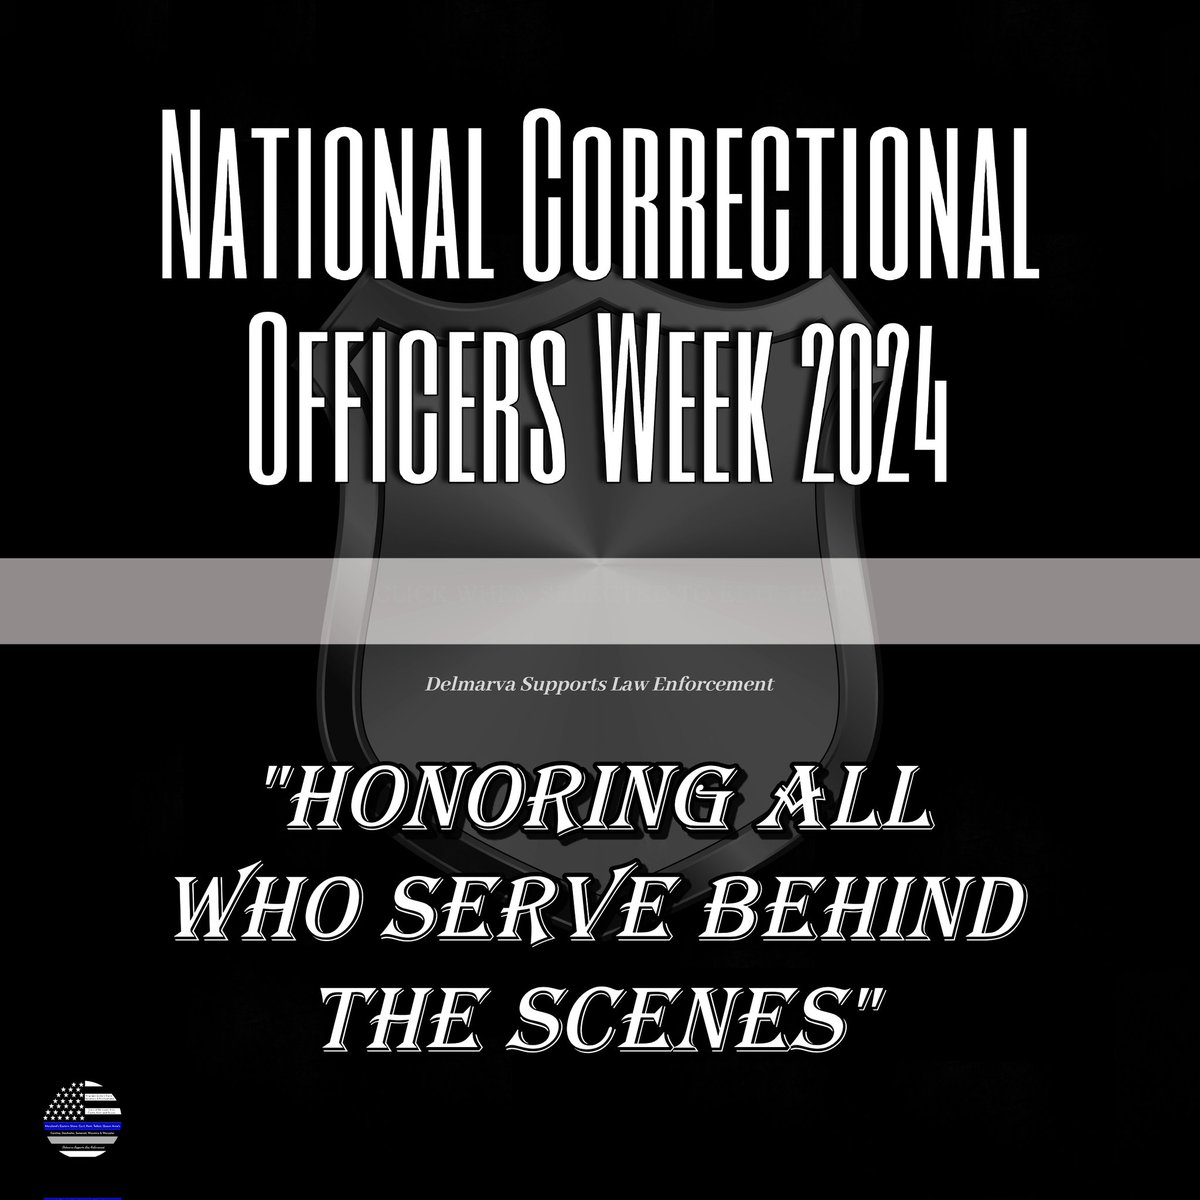 'Honoring those who serve out of sight, but not out of mind; your work is critical and essential to the safety of our society'. #correctionalofficer #ncow2024